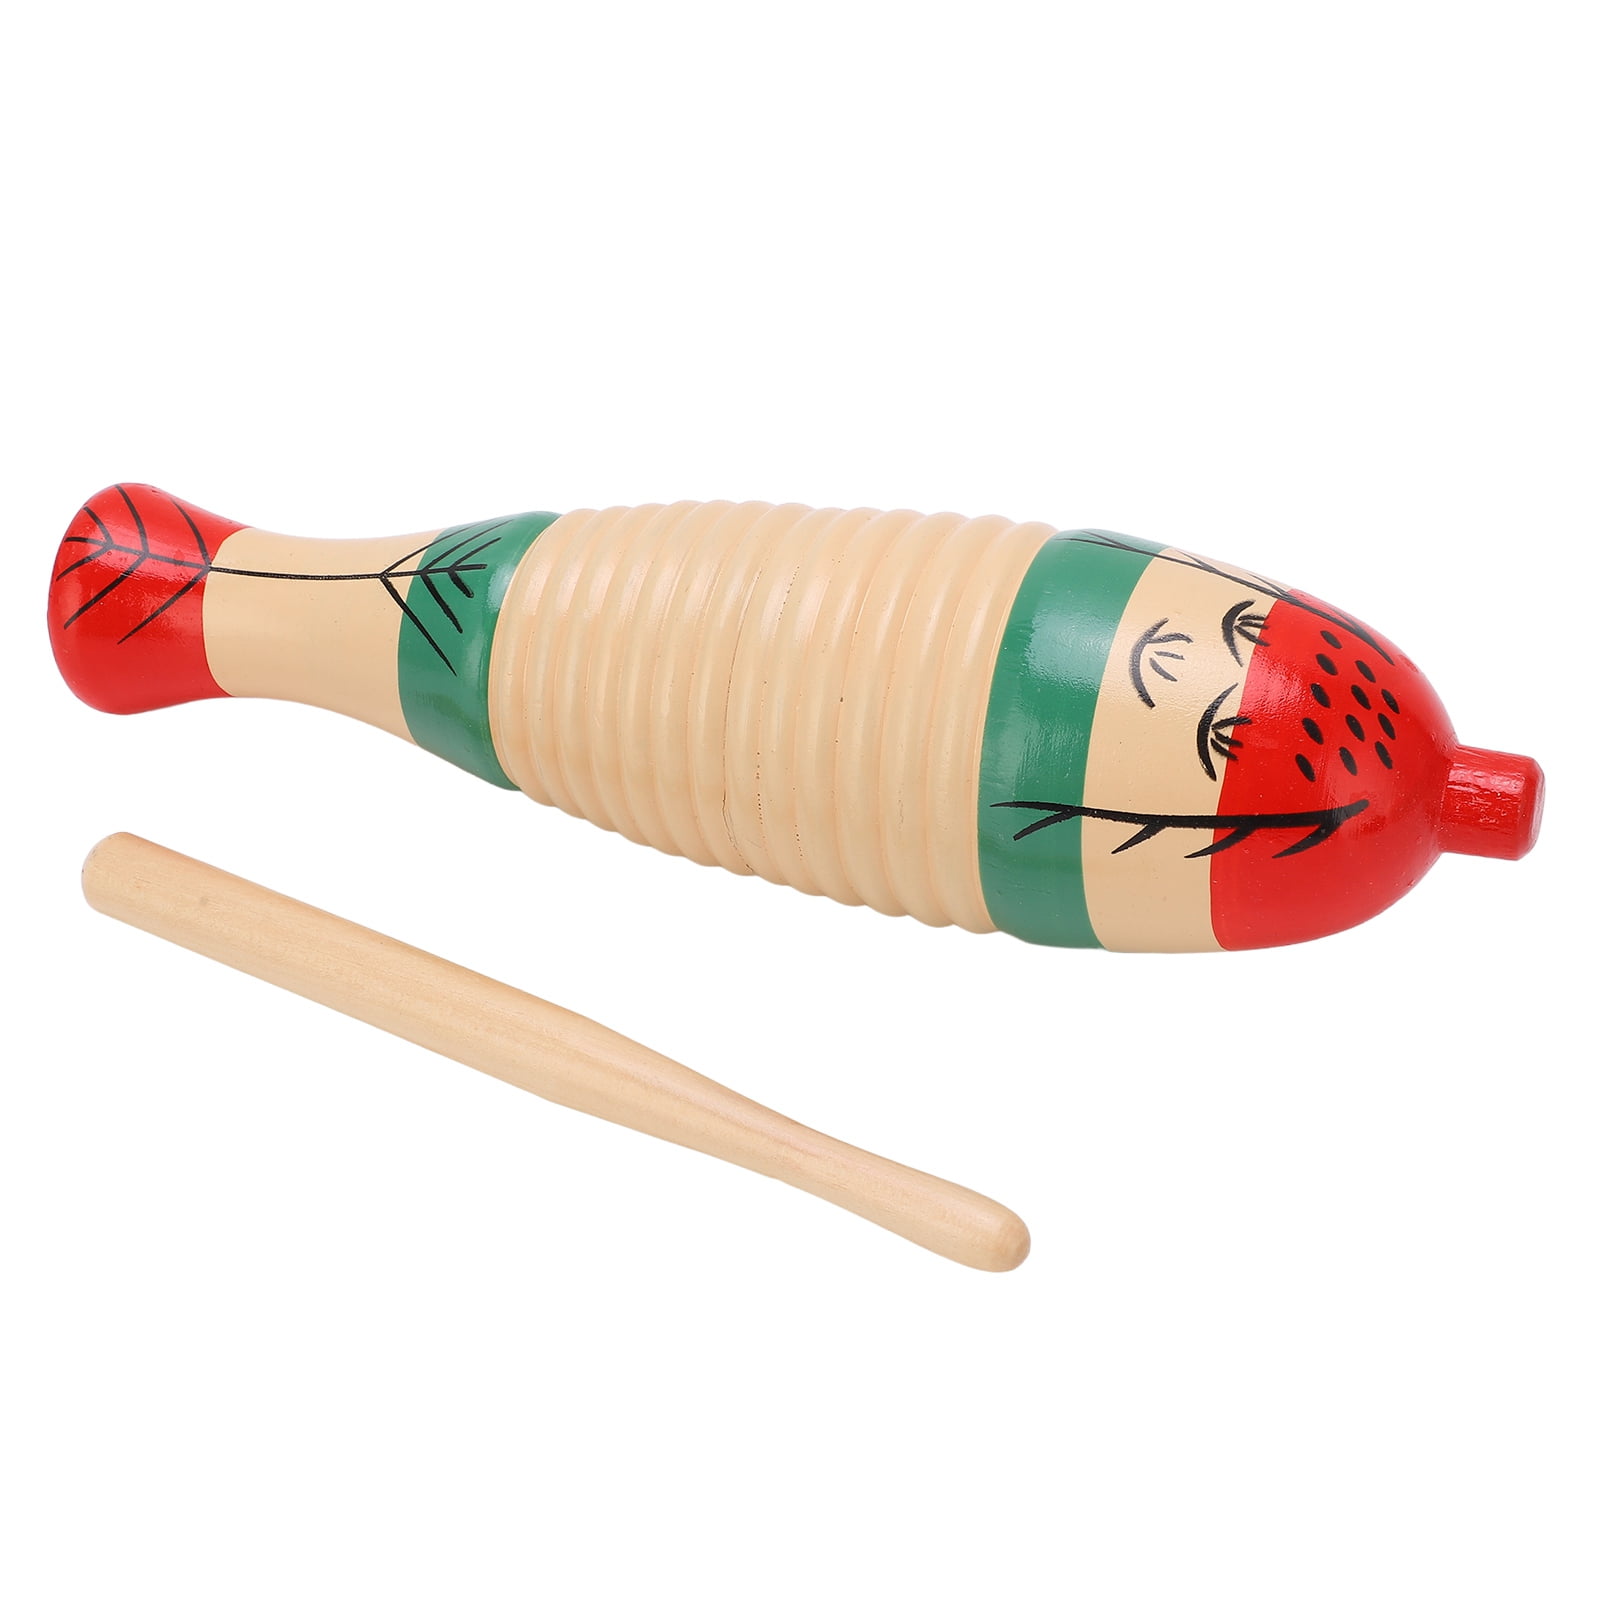 MagiDeal Wooden Fish Knocker Music Instrument Percussion Toy for Kids Gifts 